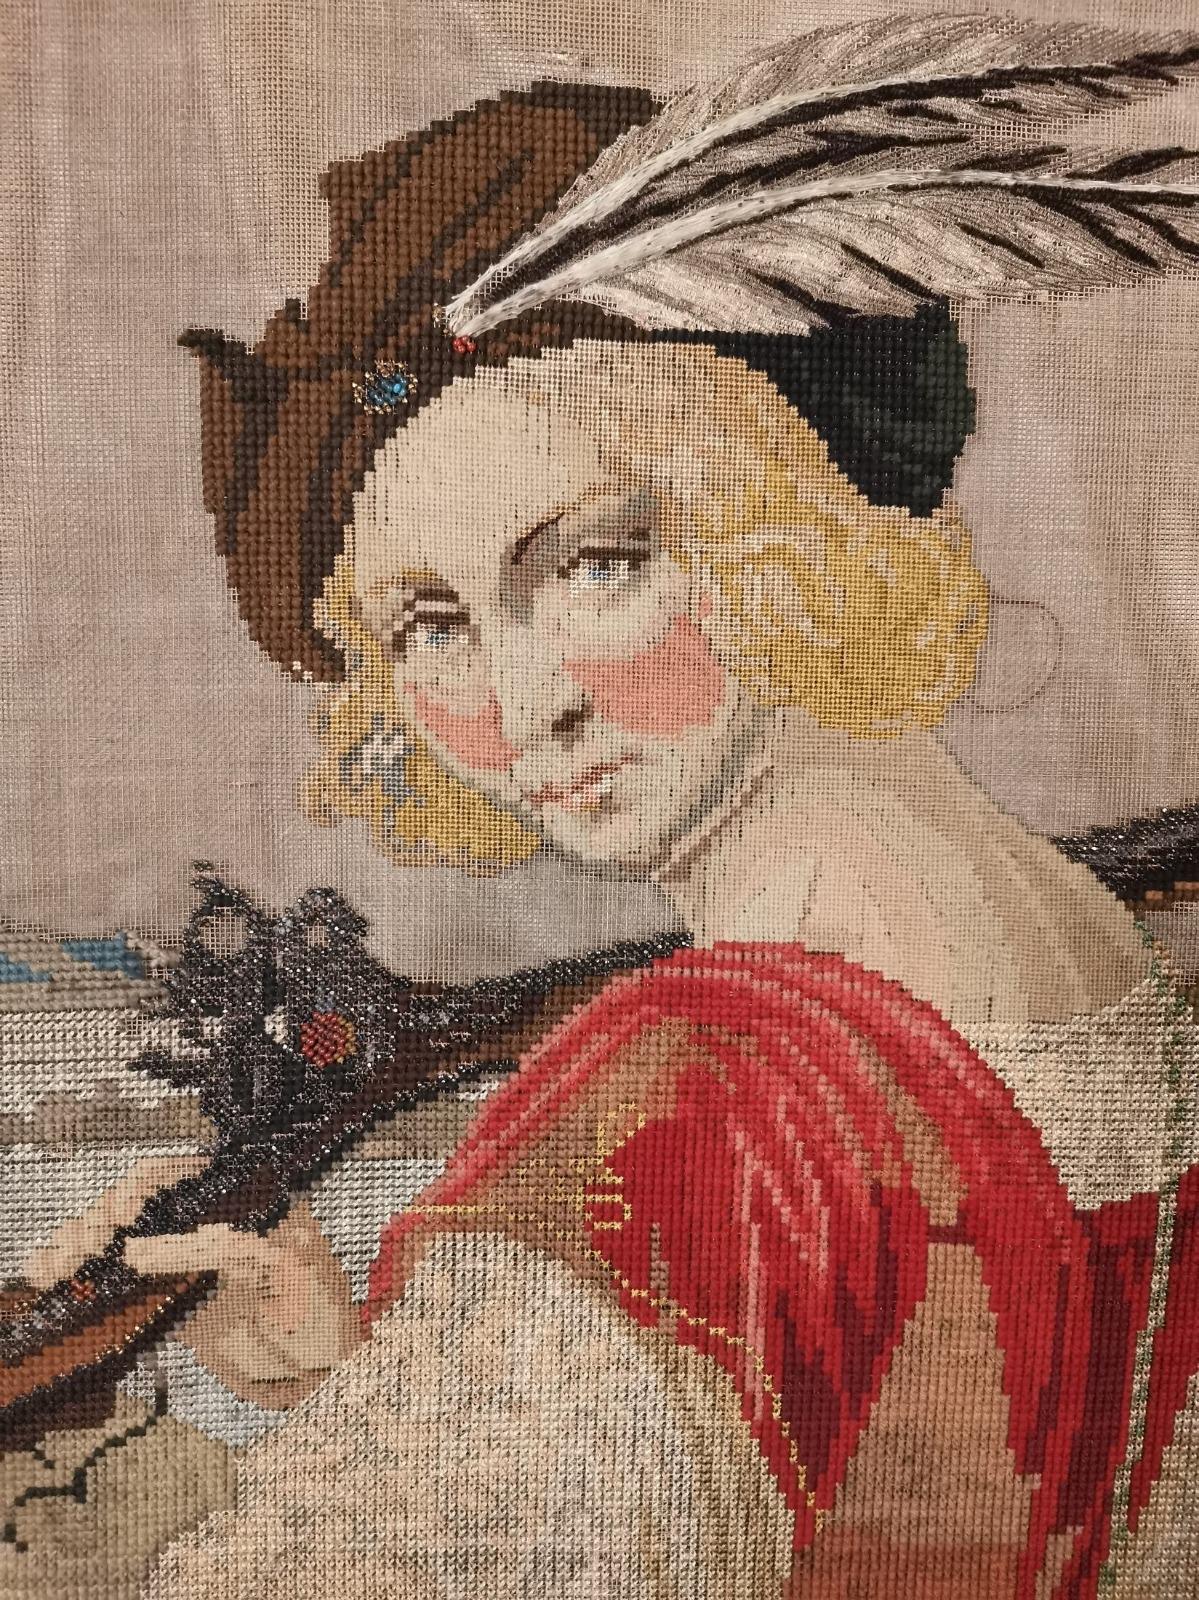 Louis XV Period fireplace screen in dore wood and tapestry
French work, 18th century carved and gilded wooden fireplace screen from the Louis XV period, with original pointed tapestry decorated with a lady holding a firearm. Removable upholstery in